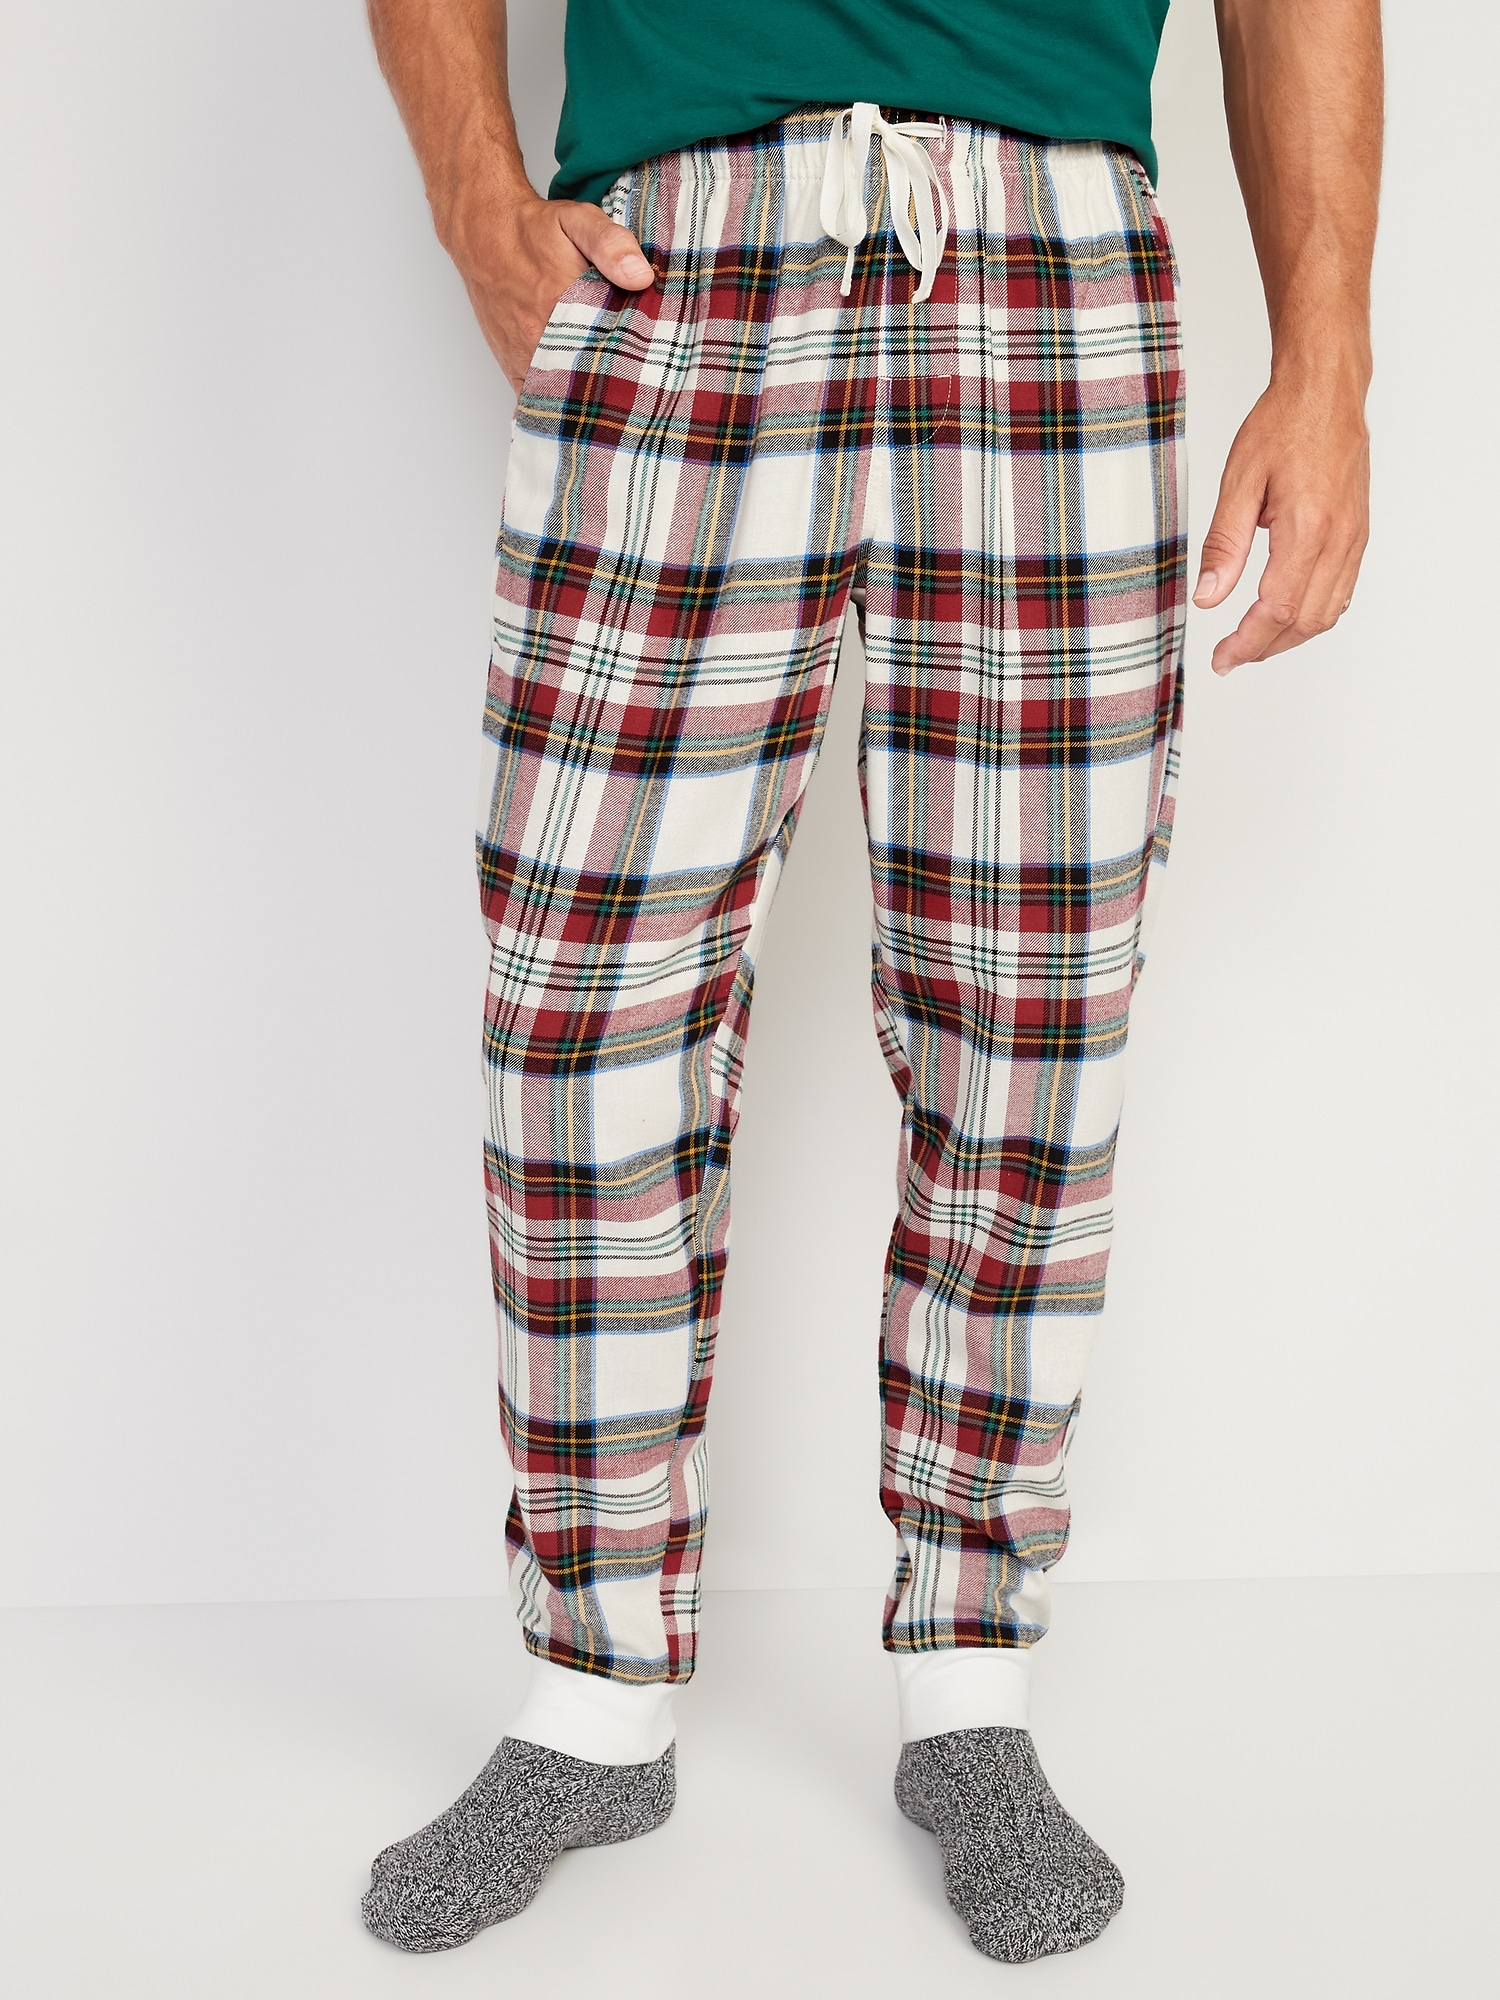 Old Navy Matching Plaid Flannel Jogger Pajama Pants for Men white. 1